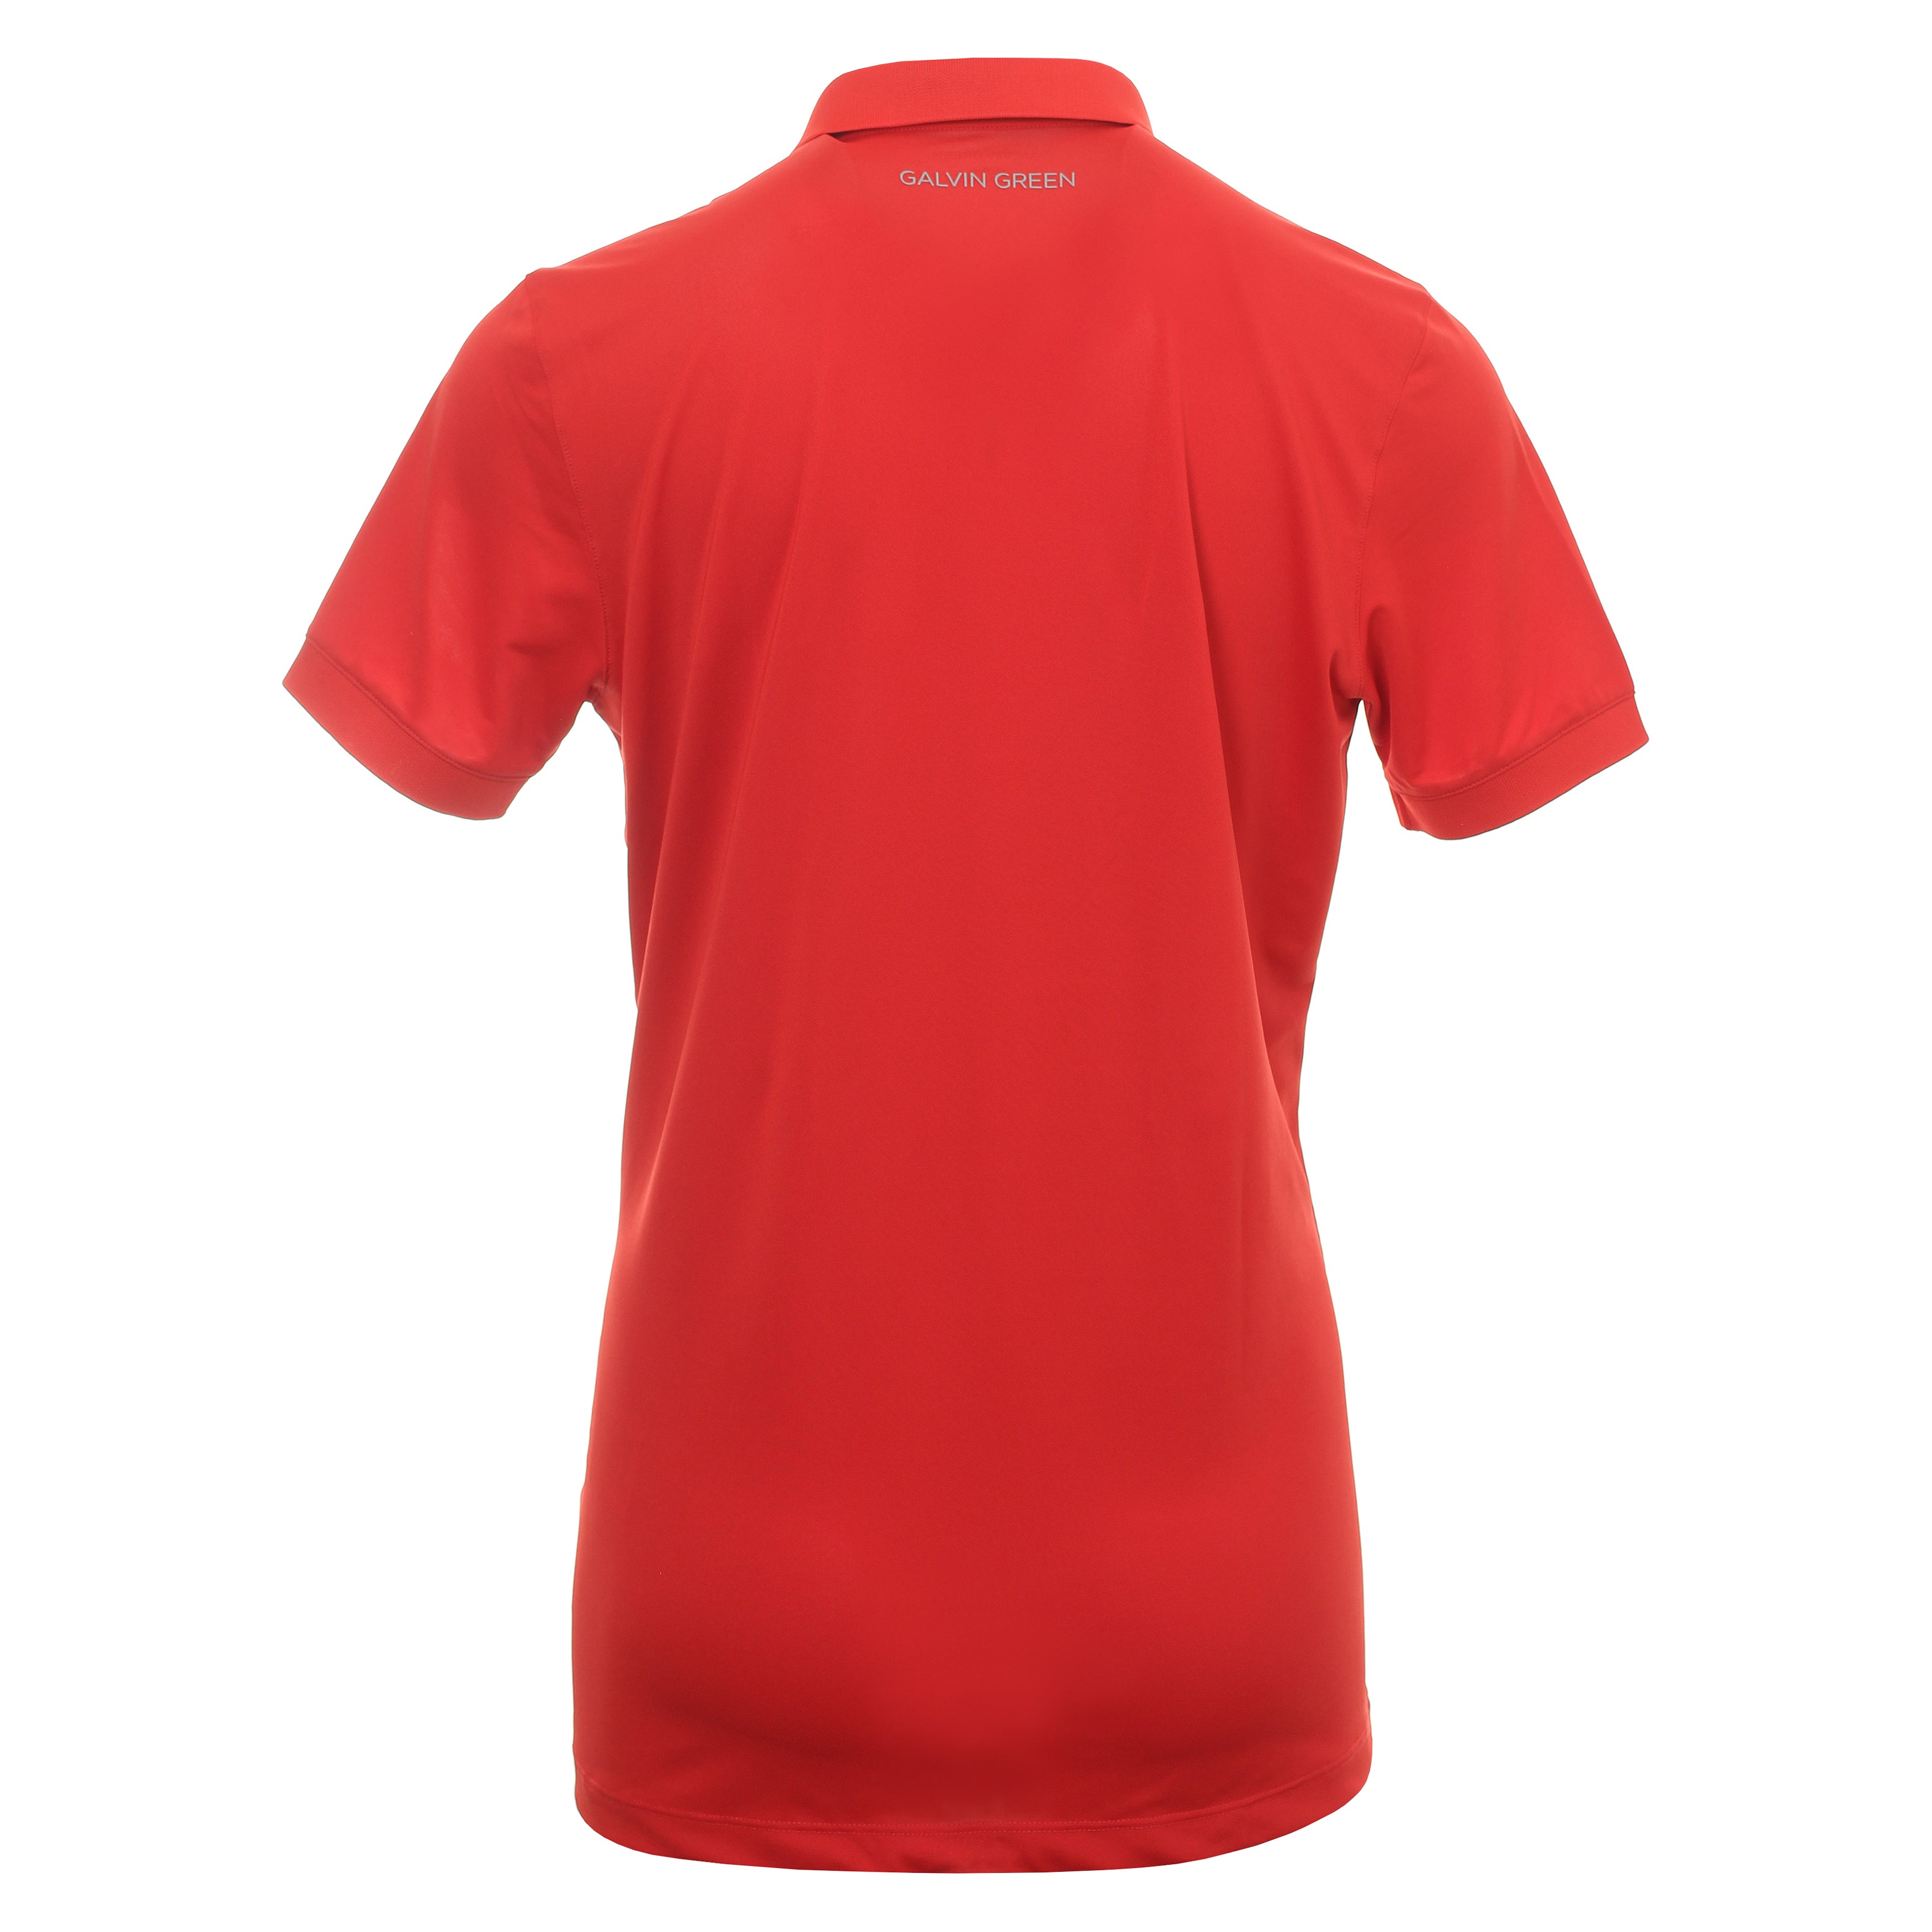 Galvin Green Max Tour Ventil8+ Golf Shirt Red 9413 | Function18